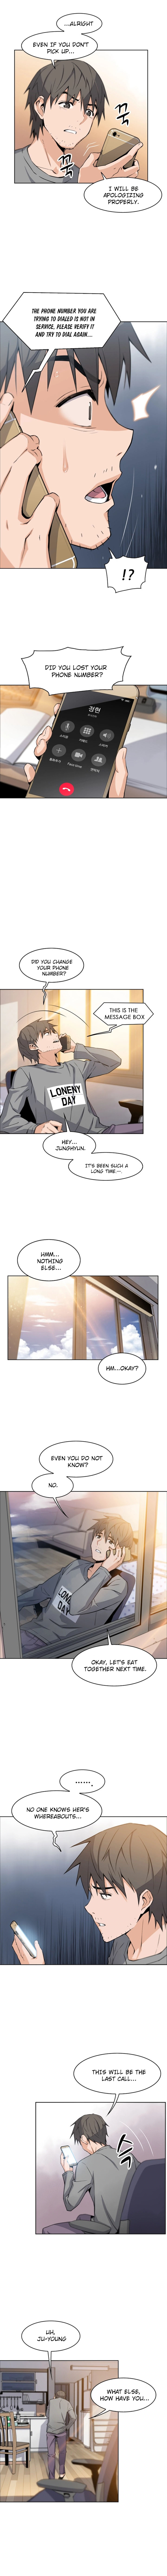 Housekeeper Manhwa - Chapter 6 Page 5